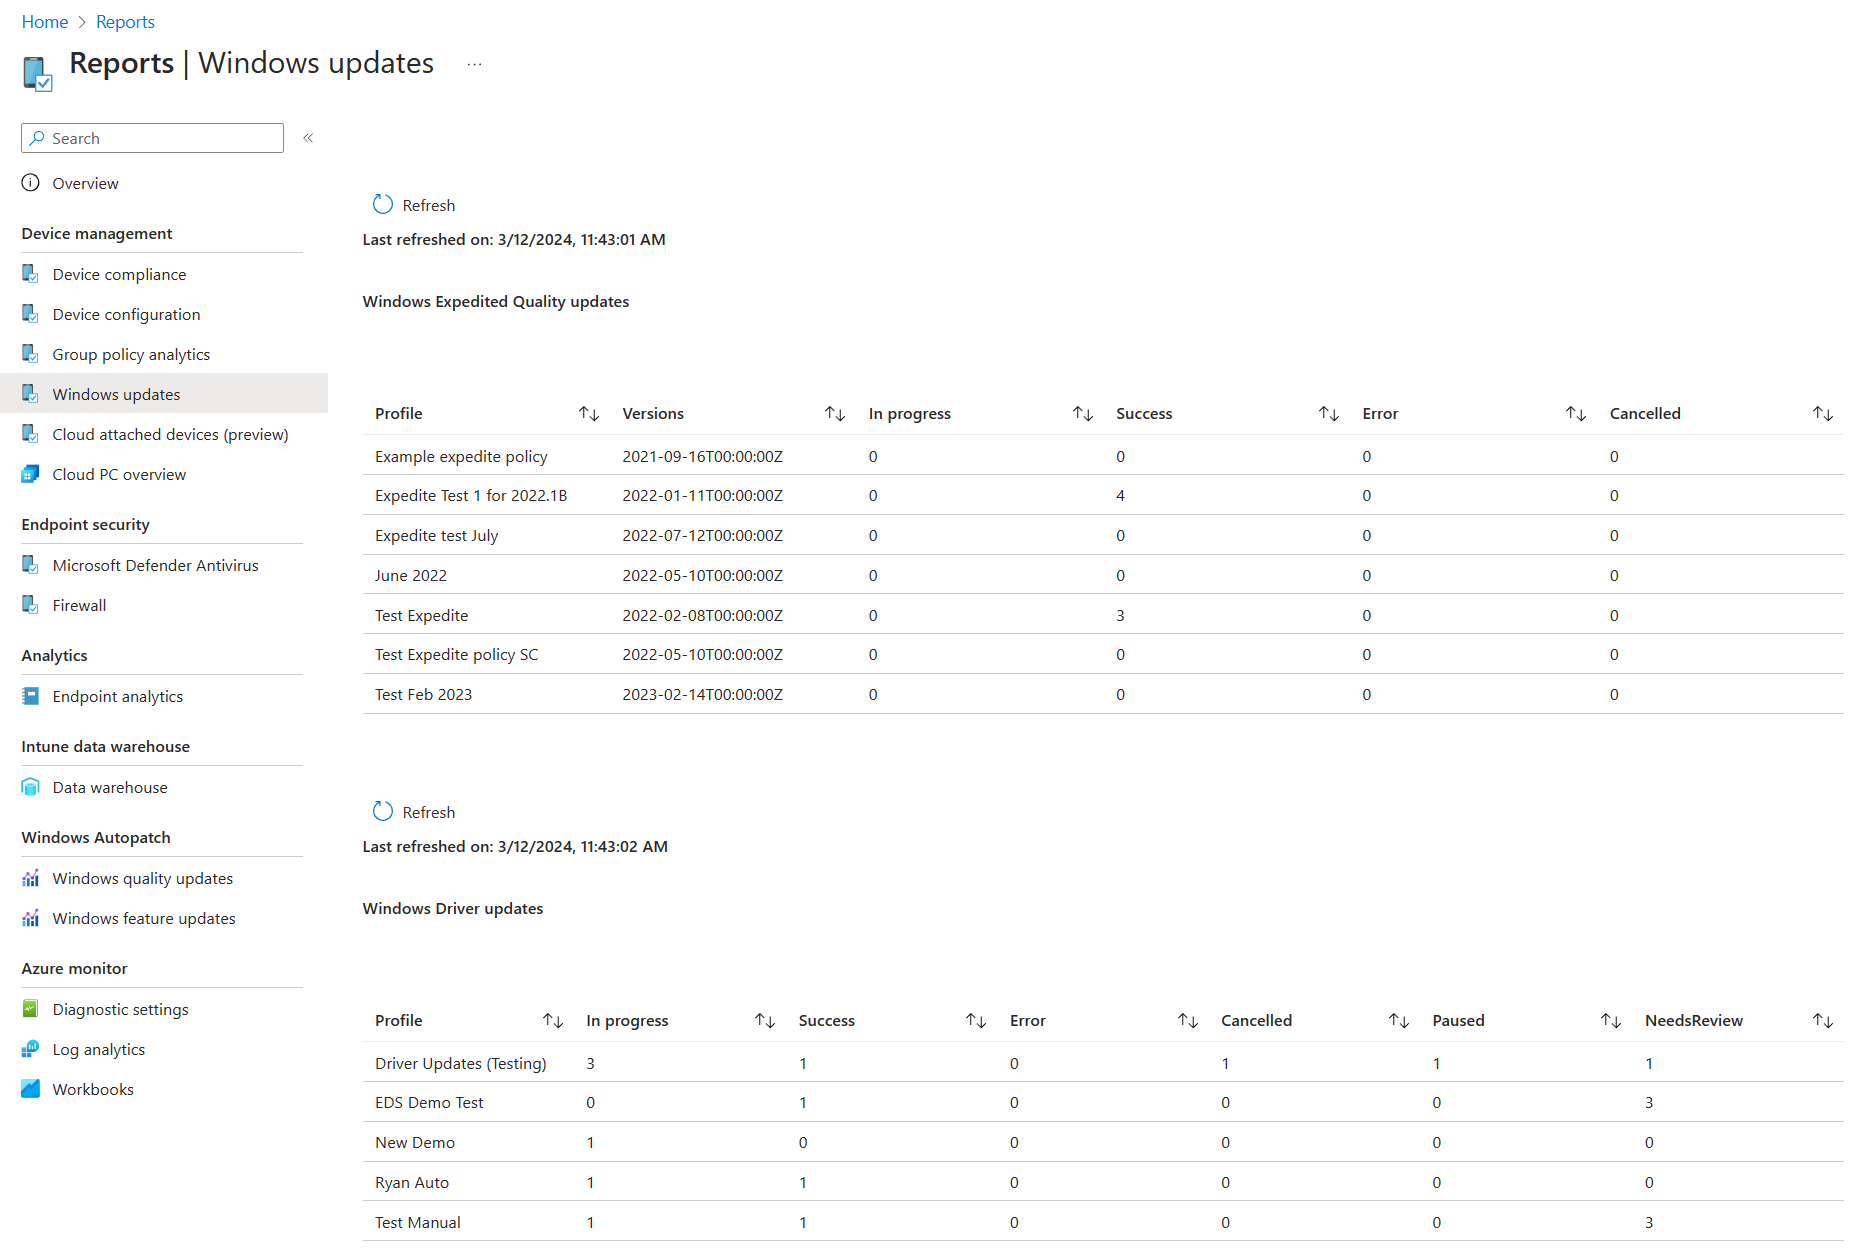 Screen capture of the Windows Driver Updates summary page.